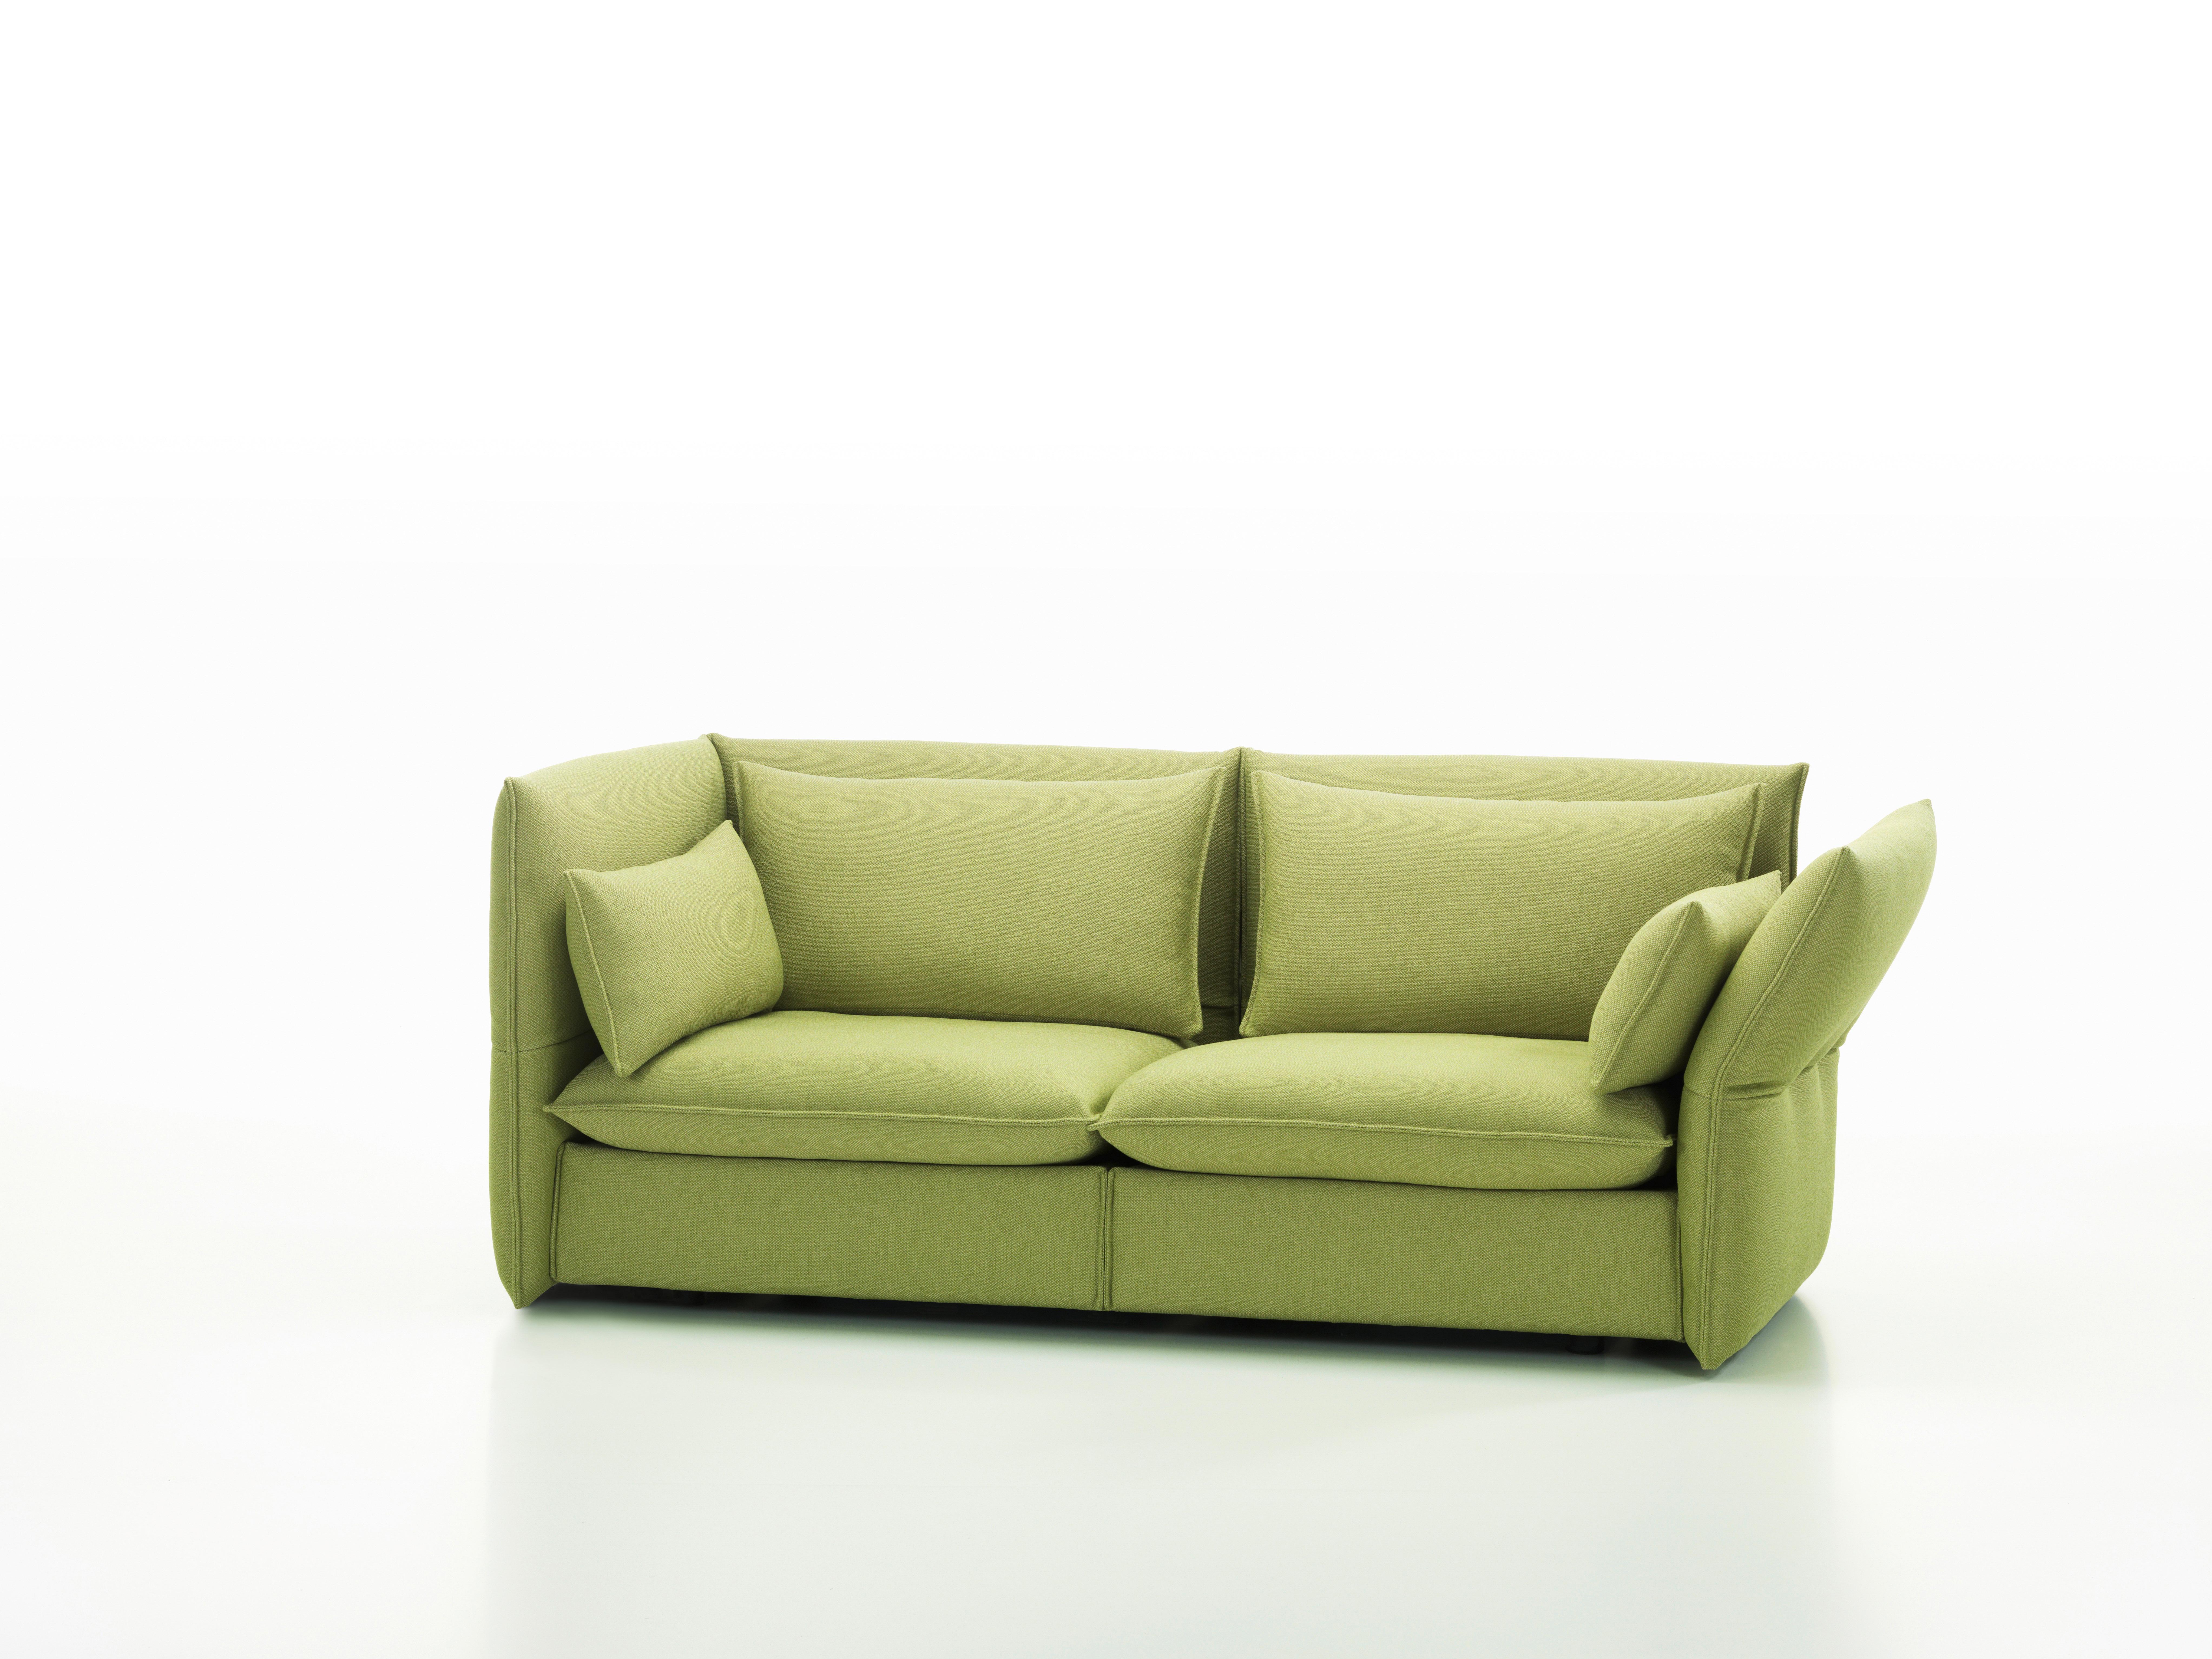 Swiss Vitra Mariposa 2 1/2-Seat Sofa in Sand Avocado by Edward Barber & Jay Osgerby For Sale